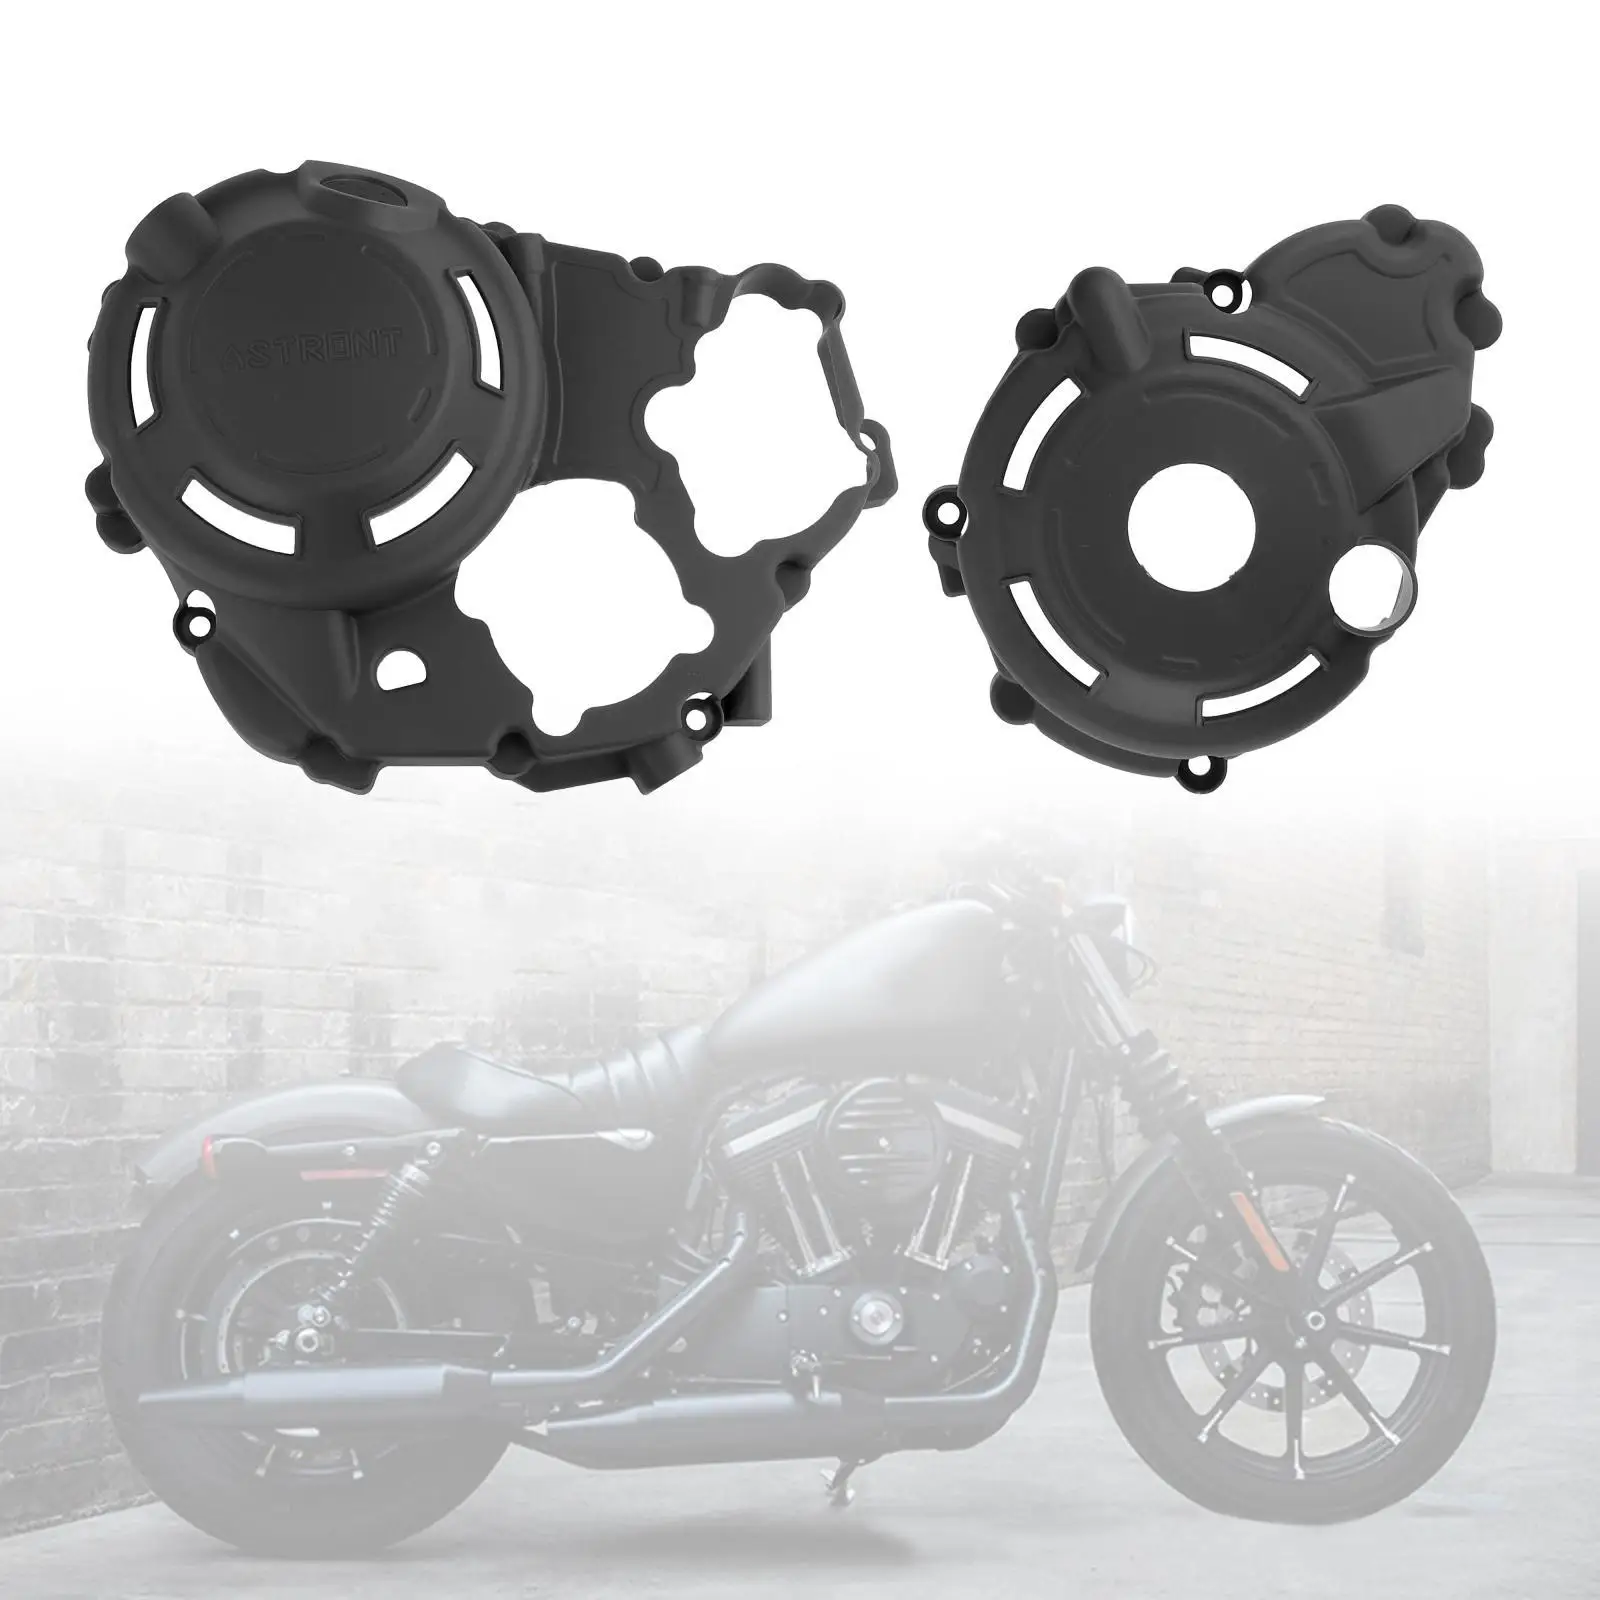 Motorcycle Engine Protector Cover Professional Guard Case Fit for